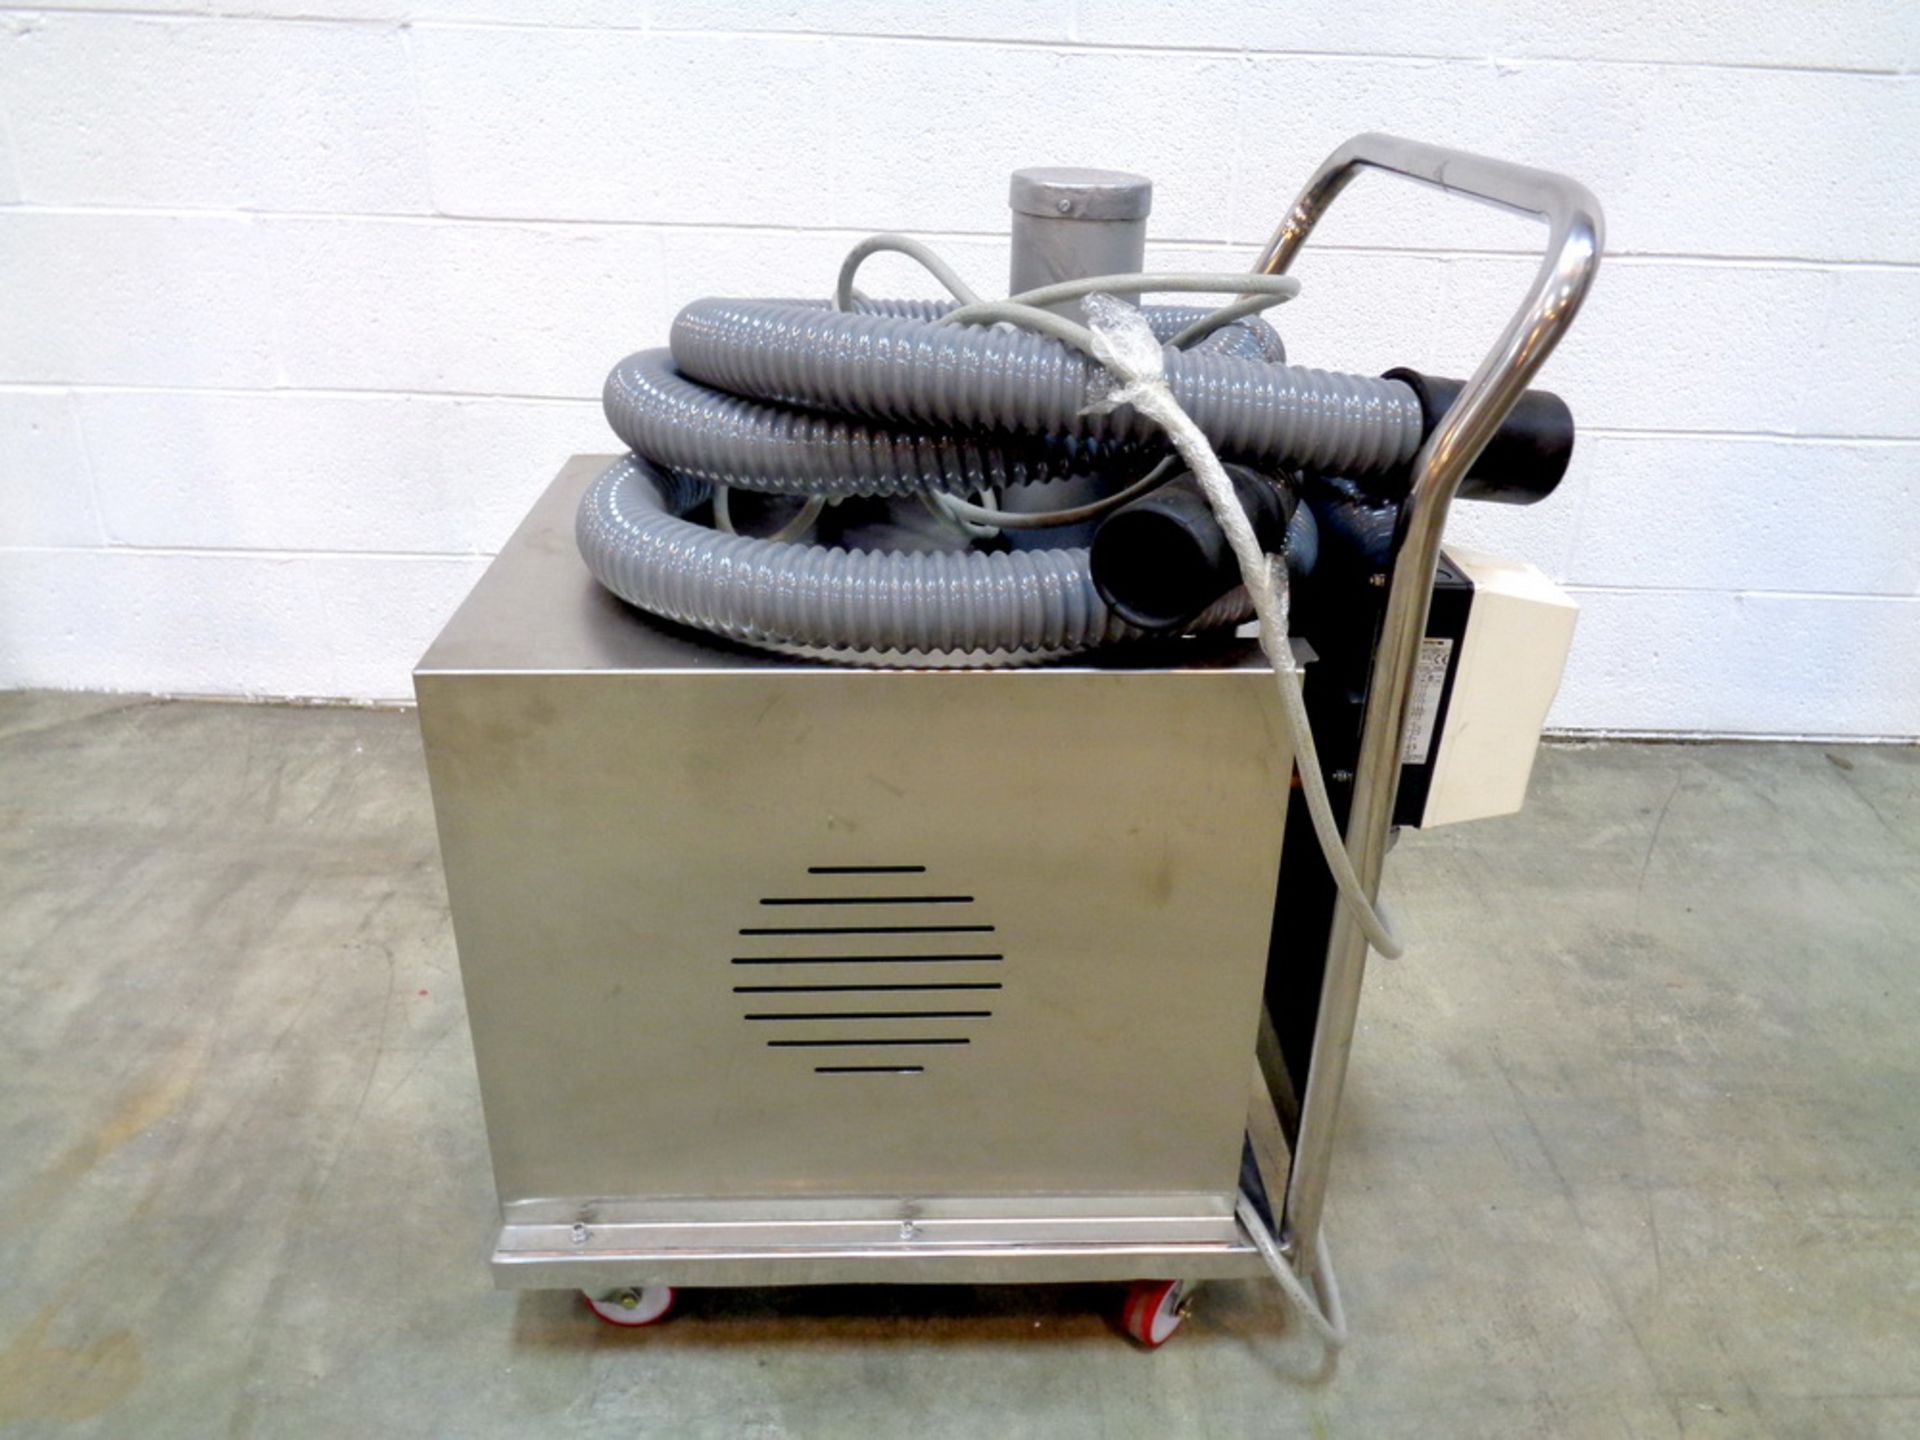 ACG PAM Stainless Steel Portable Cleaning Vacuum, Model OADU-815 - Image 2 of 2